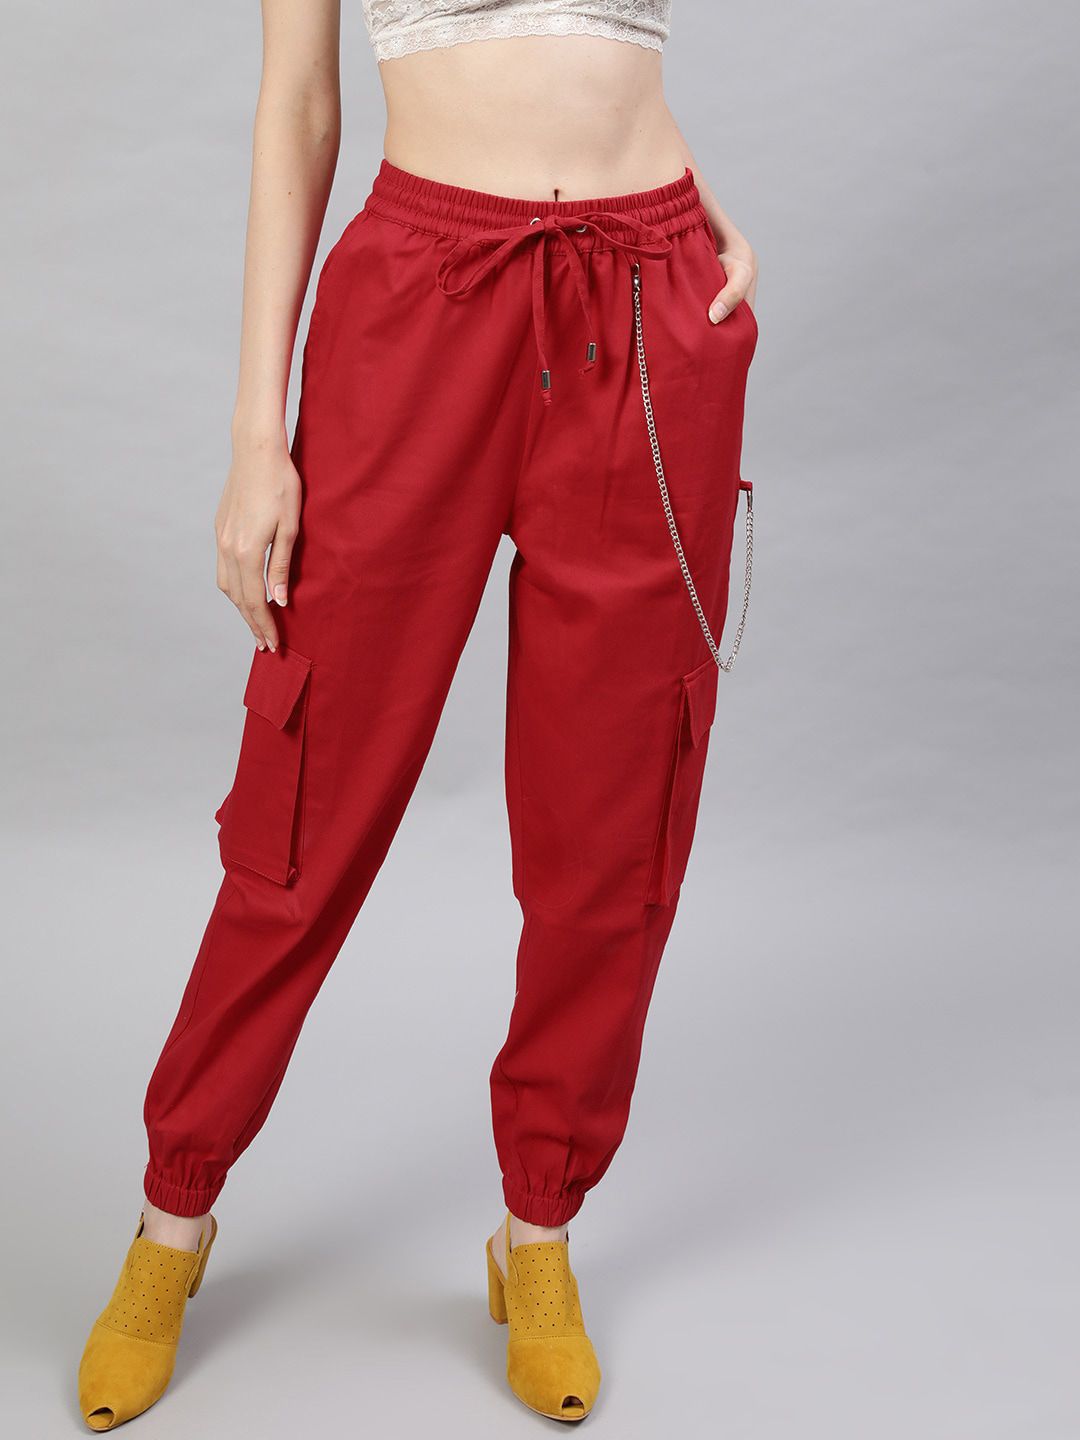 STREET 9 Women Red Twill Cargo With Chain